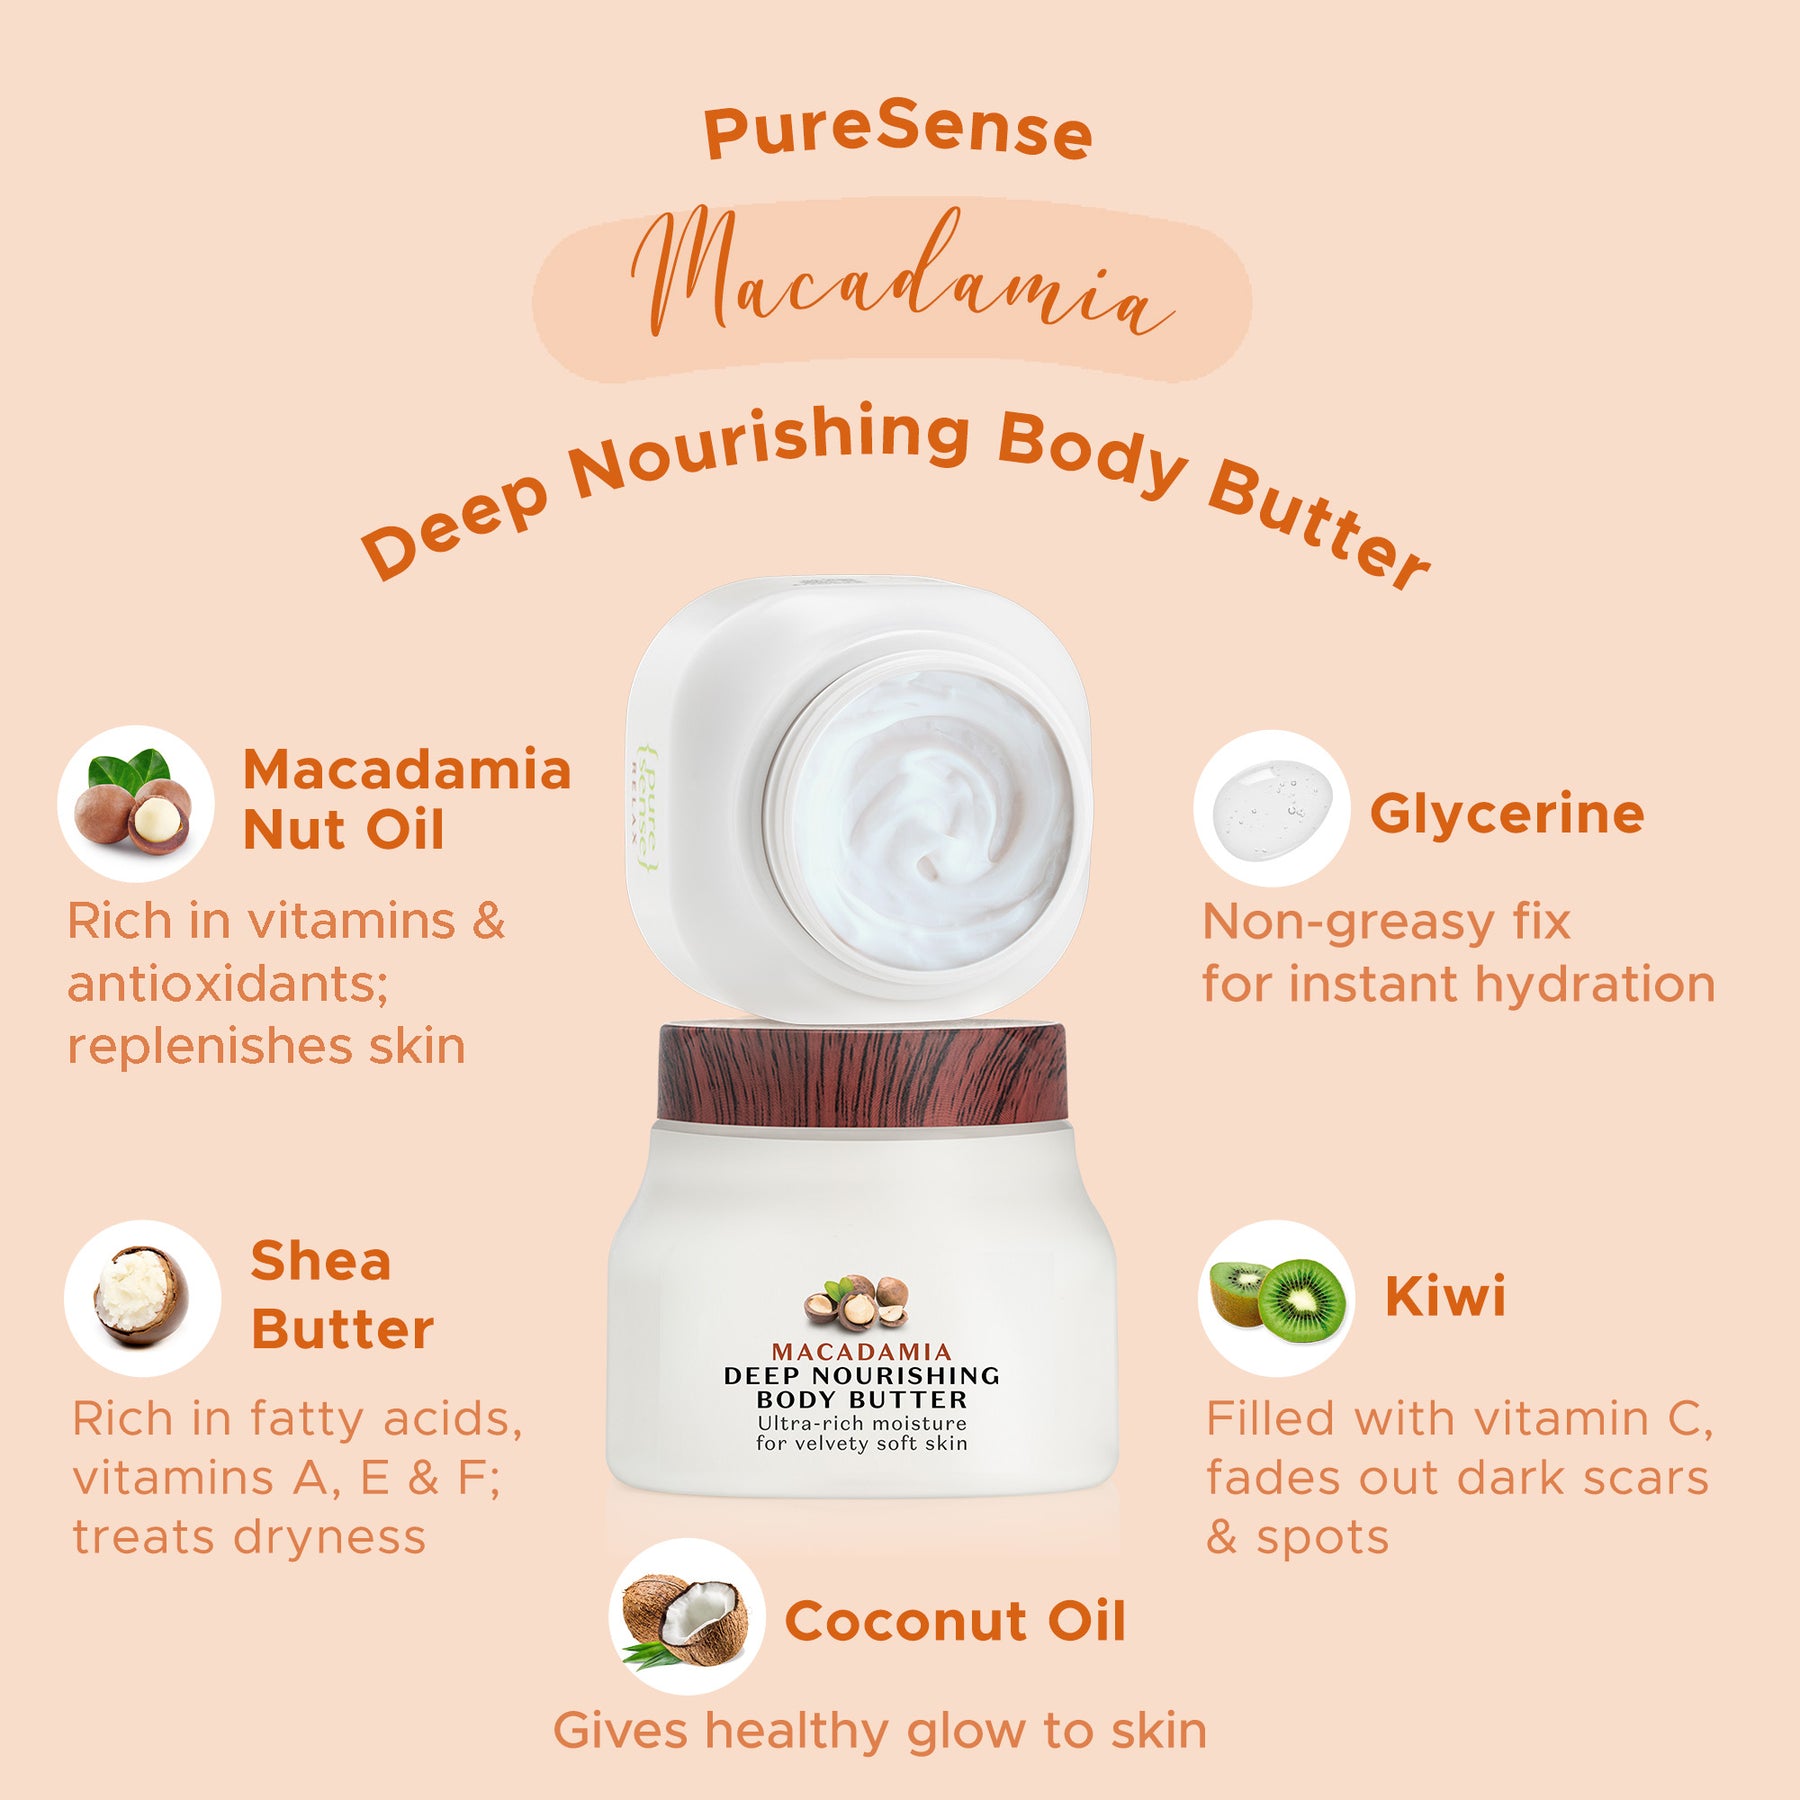 Macadamia Deep Nourishing Body Butter | From the makers of Parachute Advansed | 140 ml - PureSense